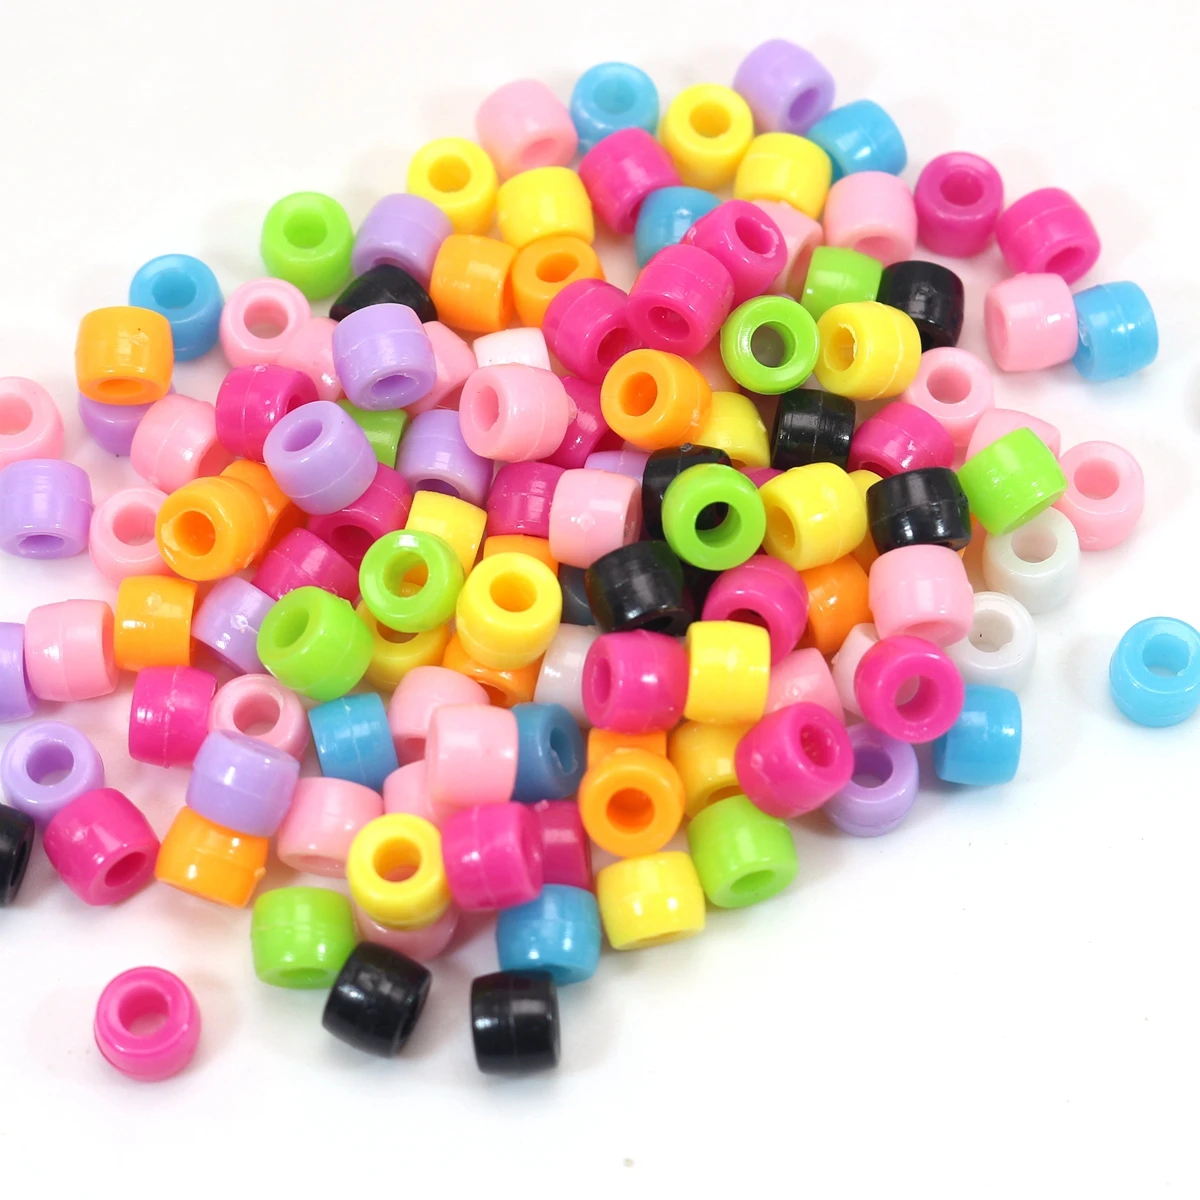 Beading Supplies, Arts & Crafts Materials for Jewelry Making (1000 Glitter  Pony Beads) | ArtBeek